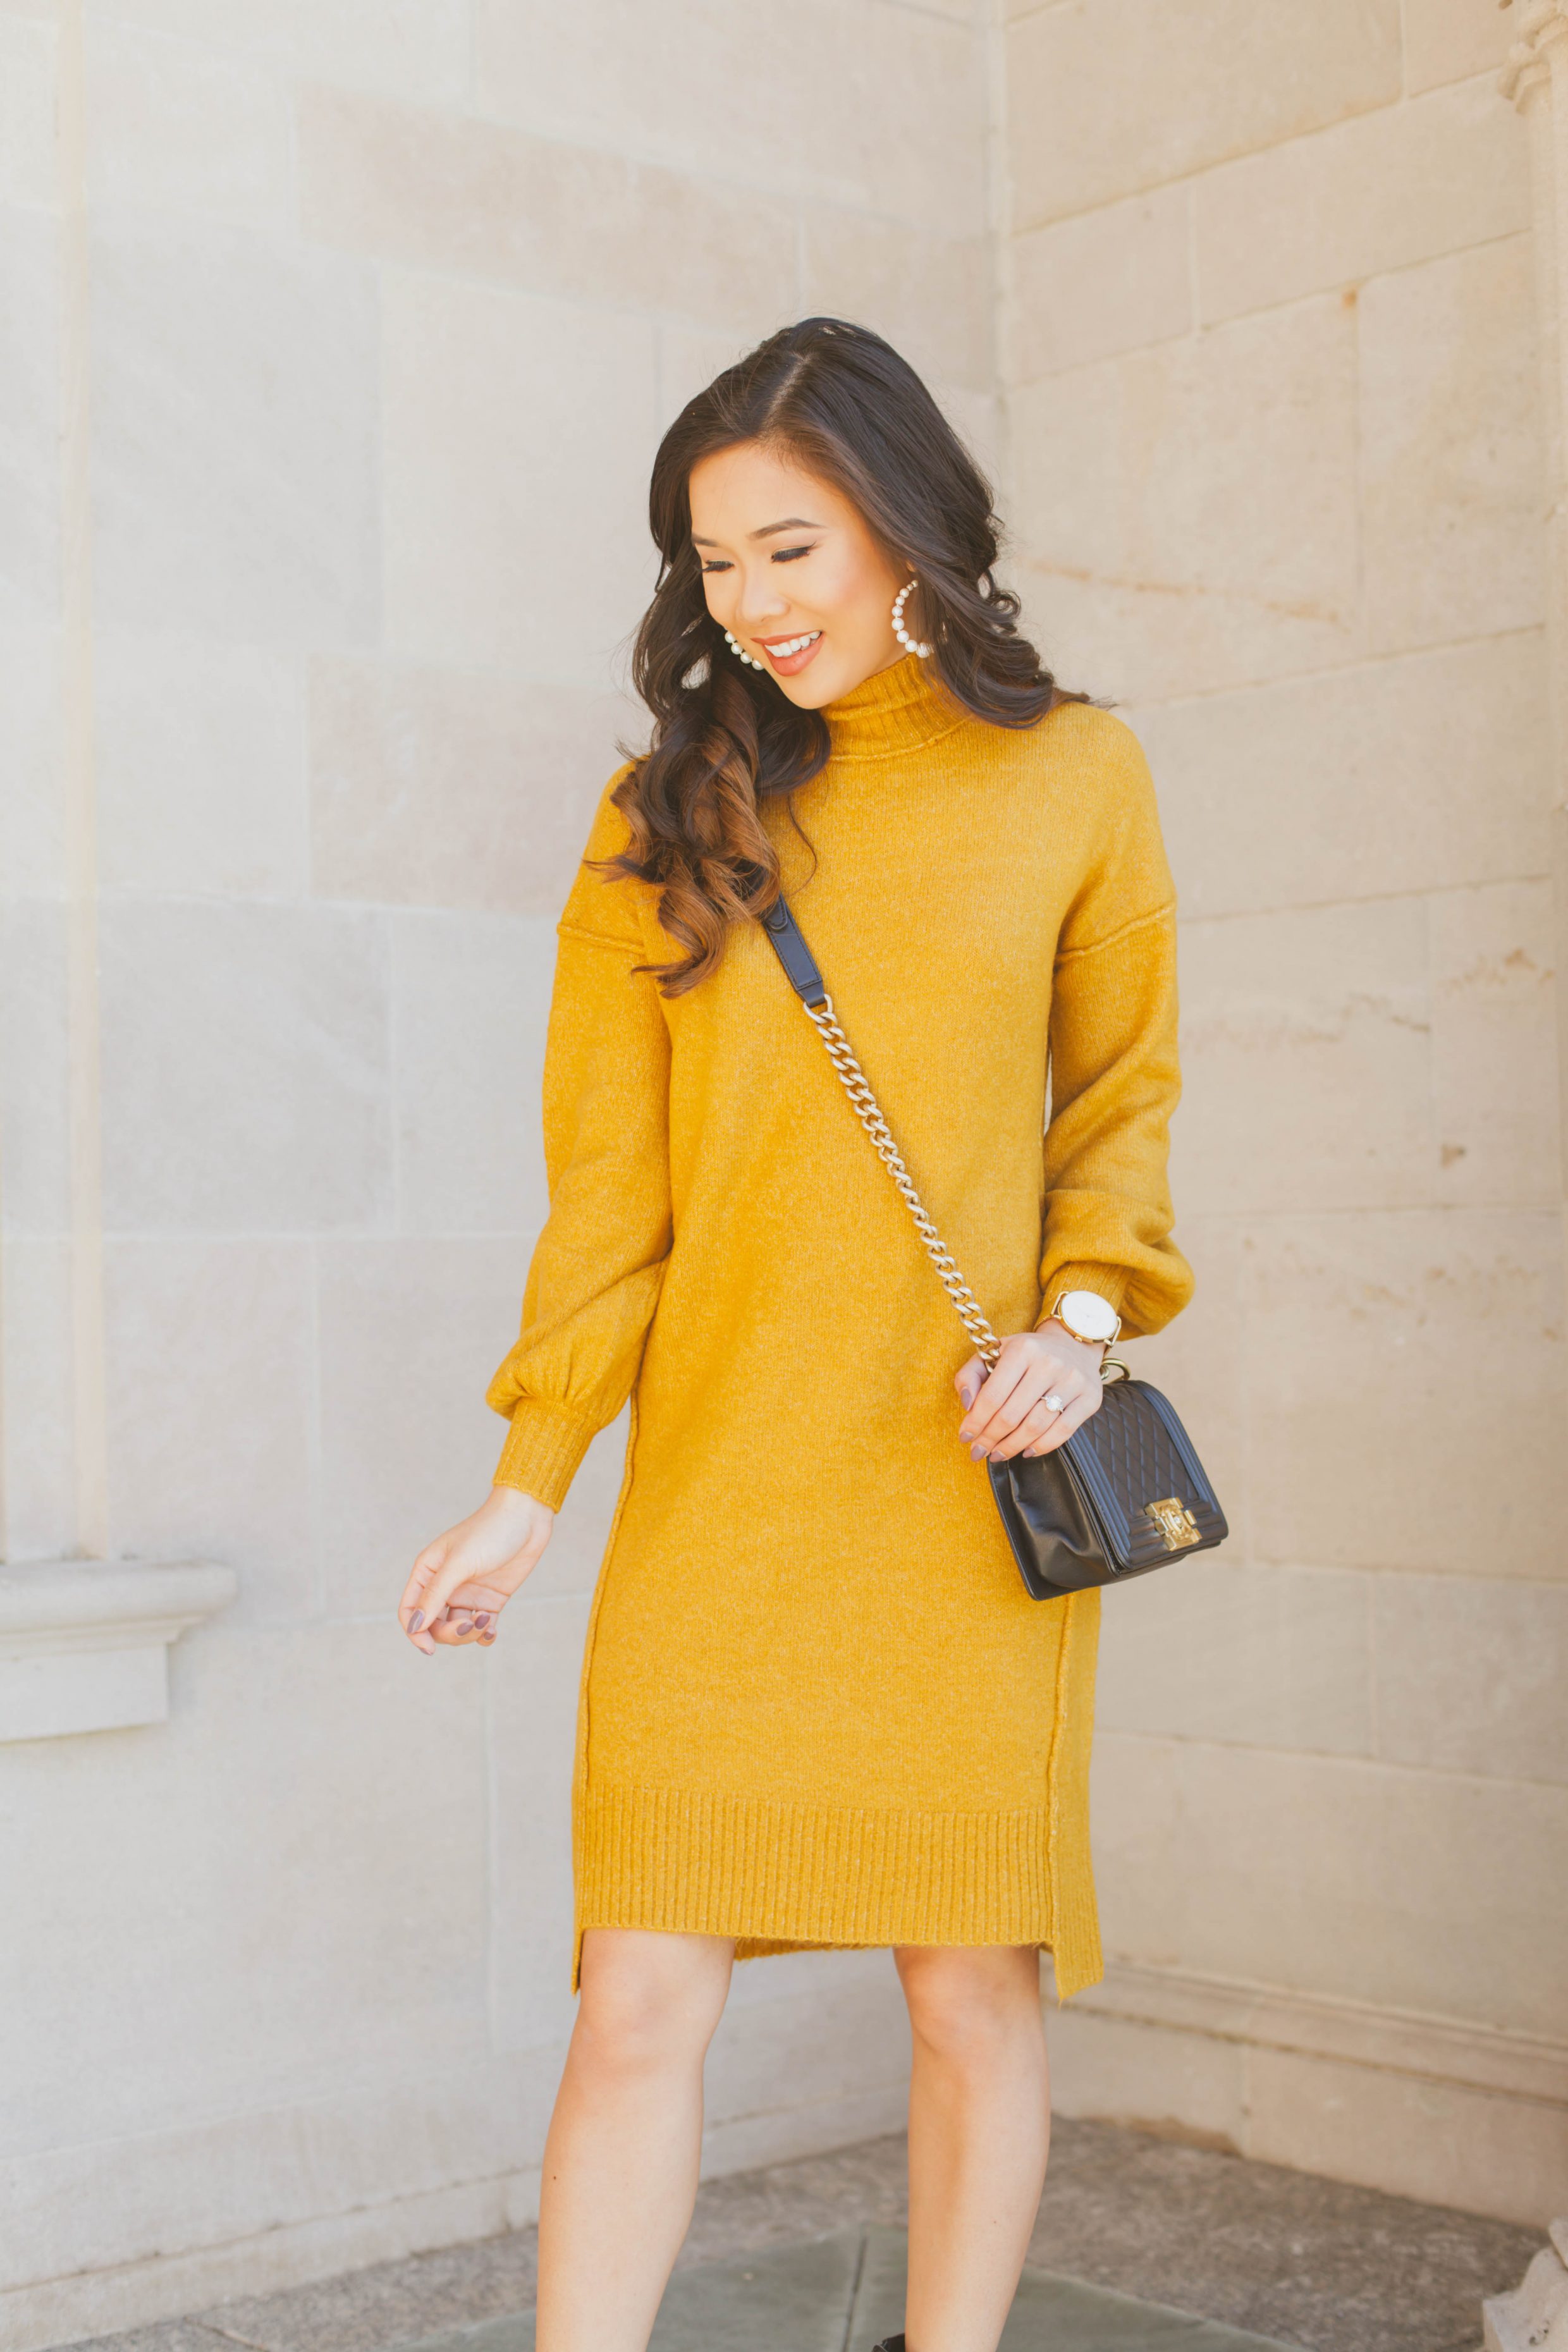 Touches of Gold :: Balloon Sleeve Dress + Block Heel Boots - Color & Chic